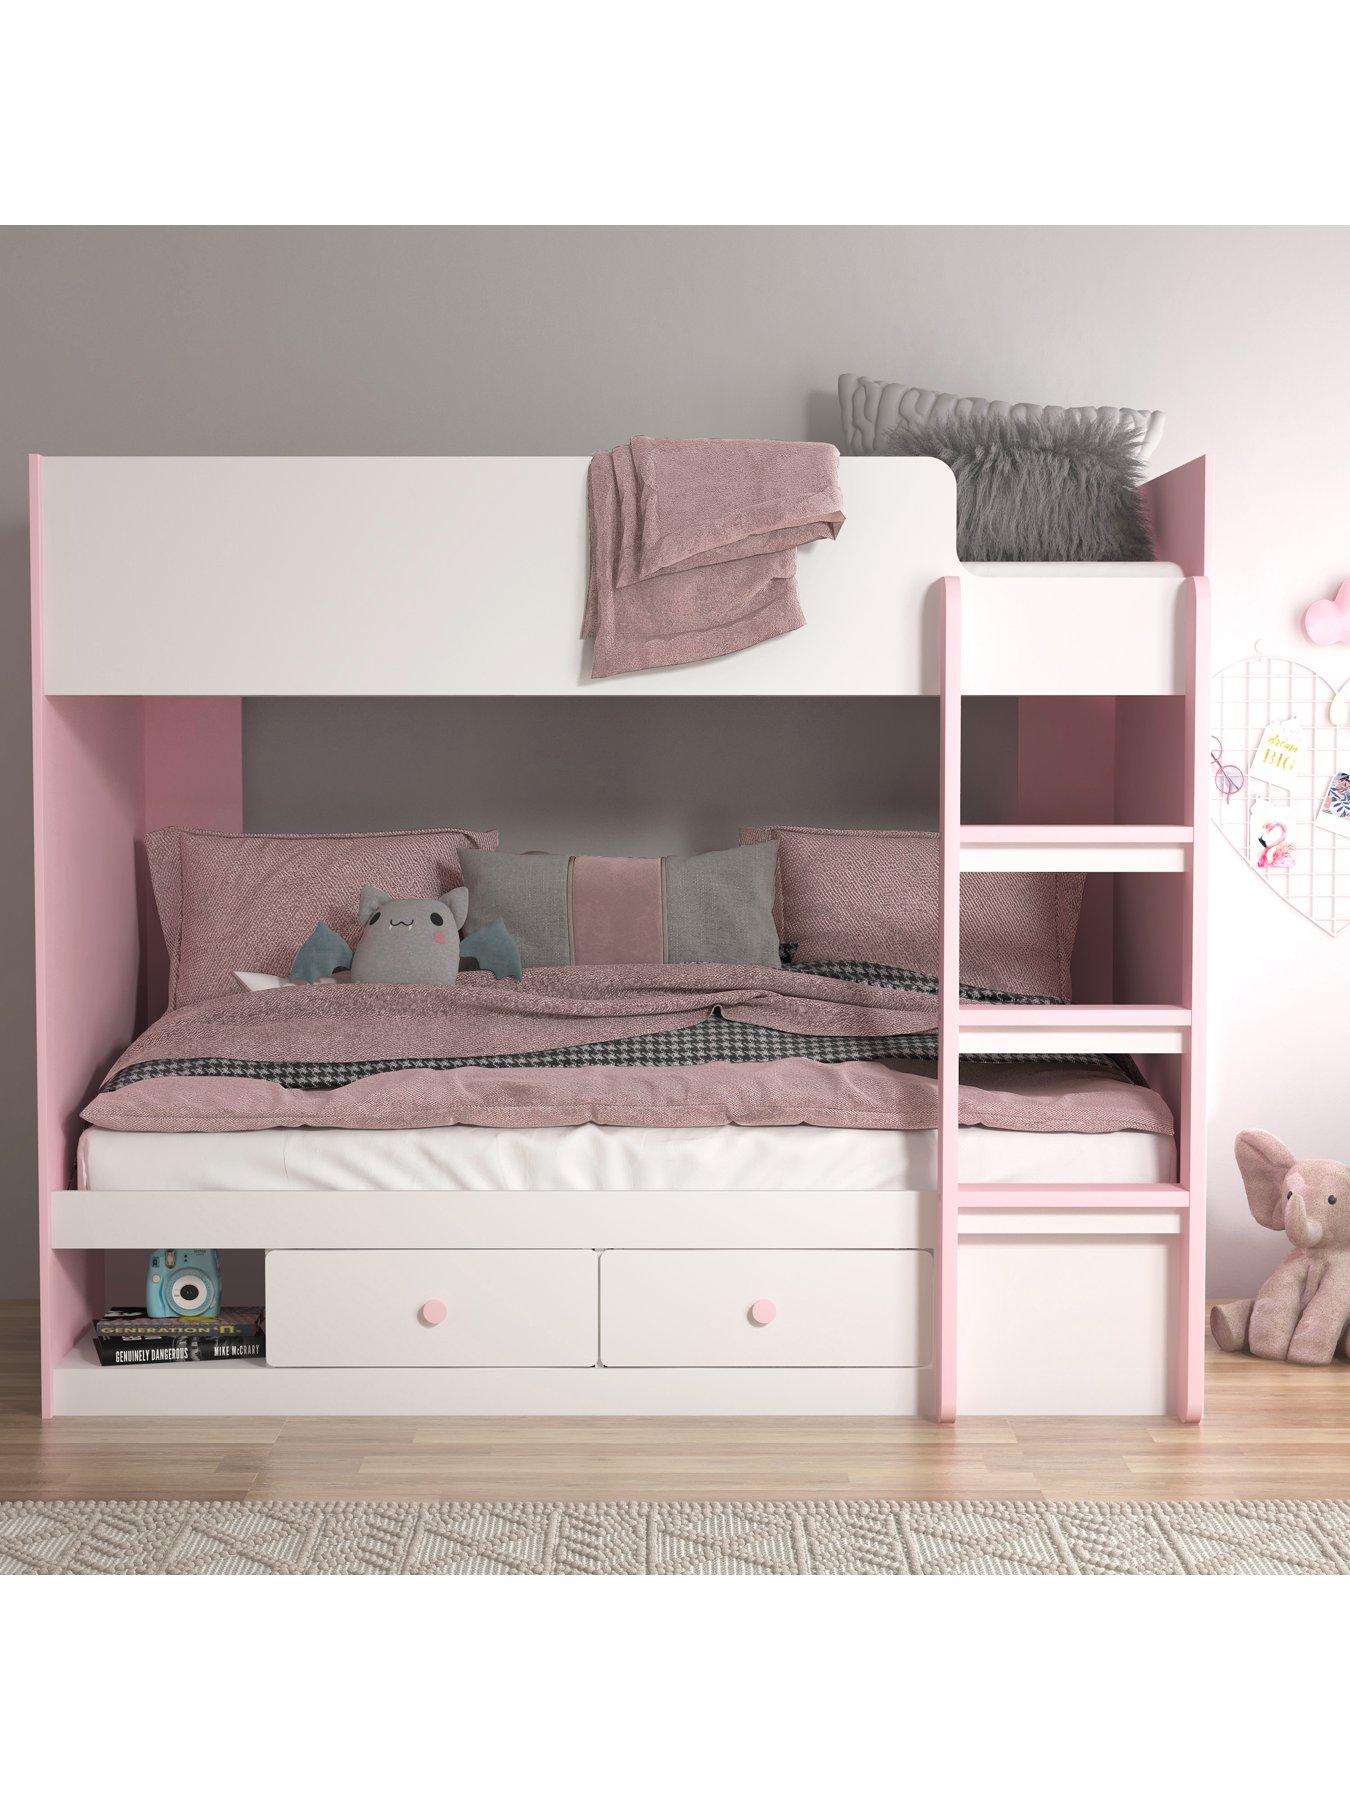 white bunk beds for sale